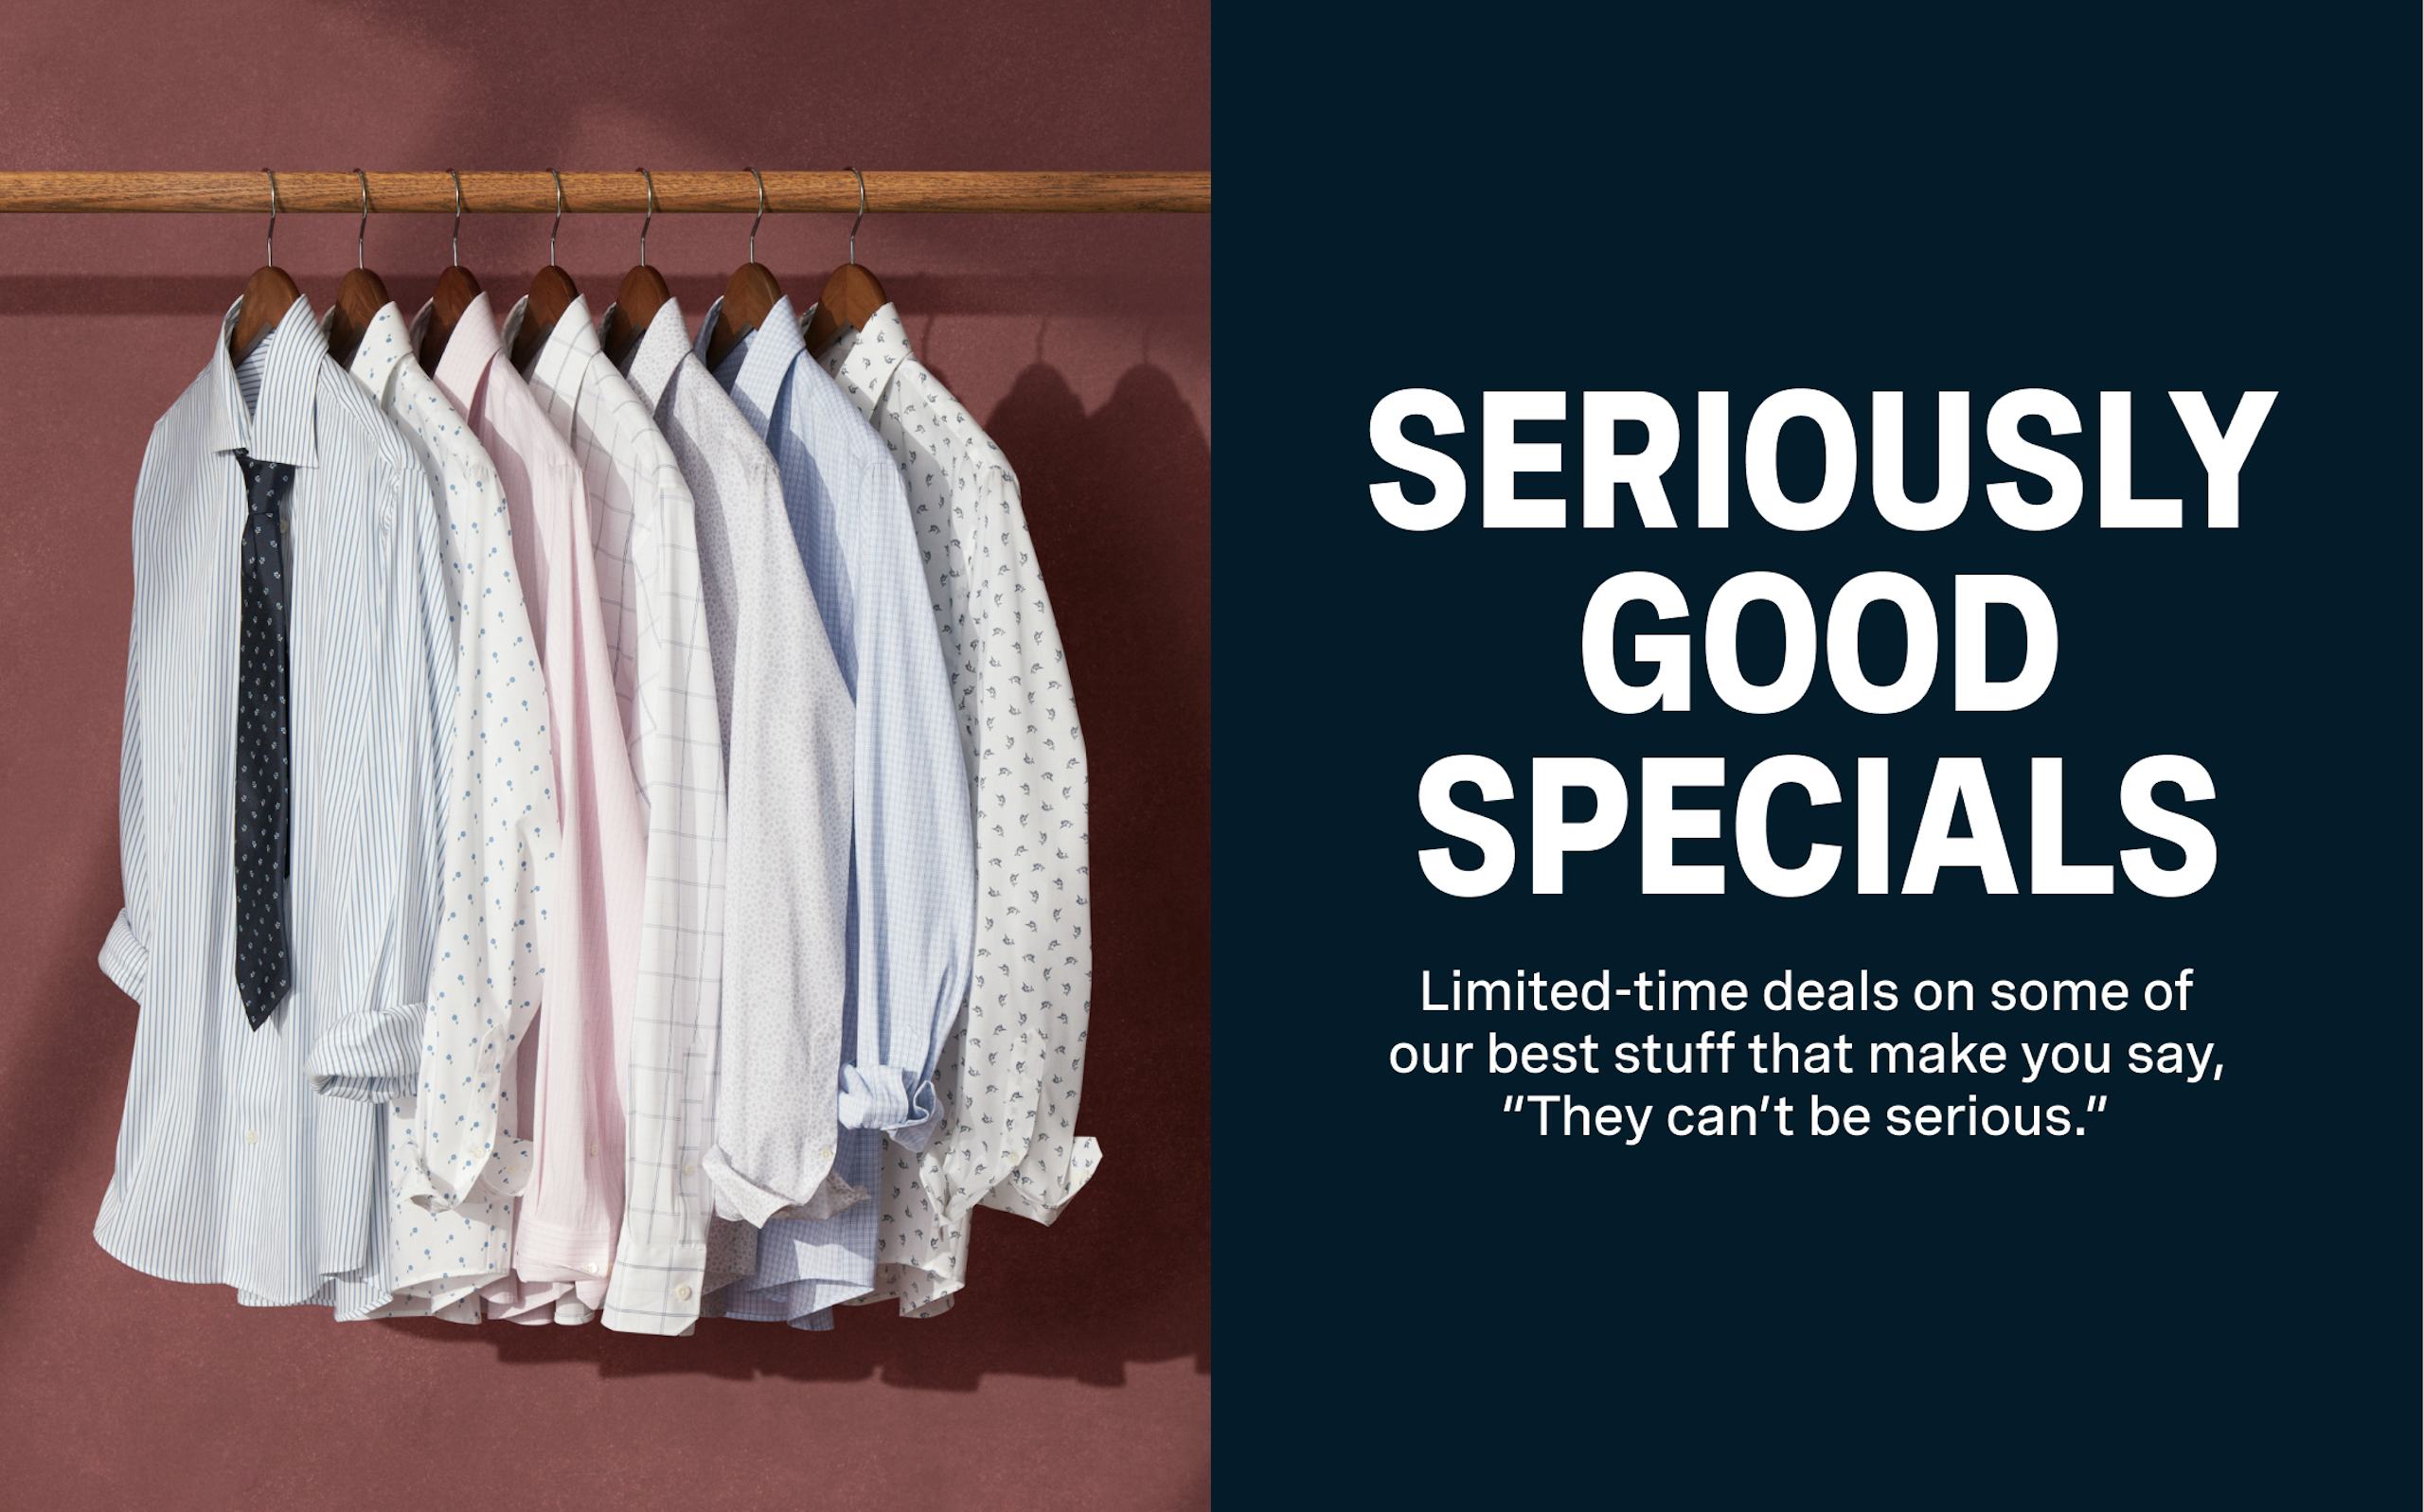 Seriously Good Specials | Limited-time deals on some of our best stuff that make you say, "They can't be serious."